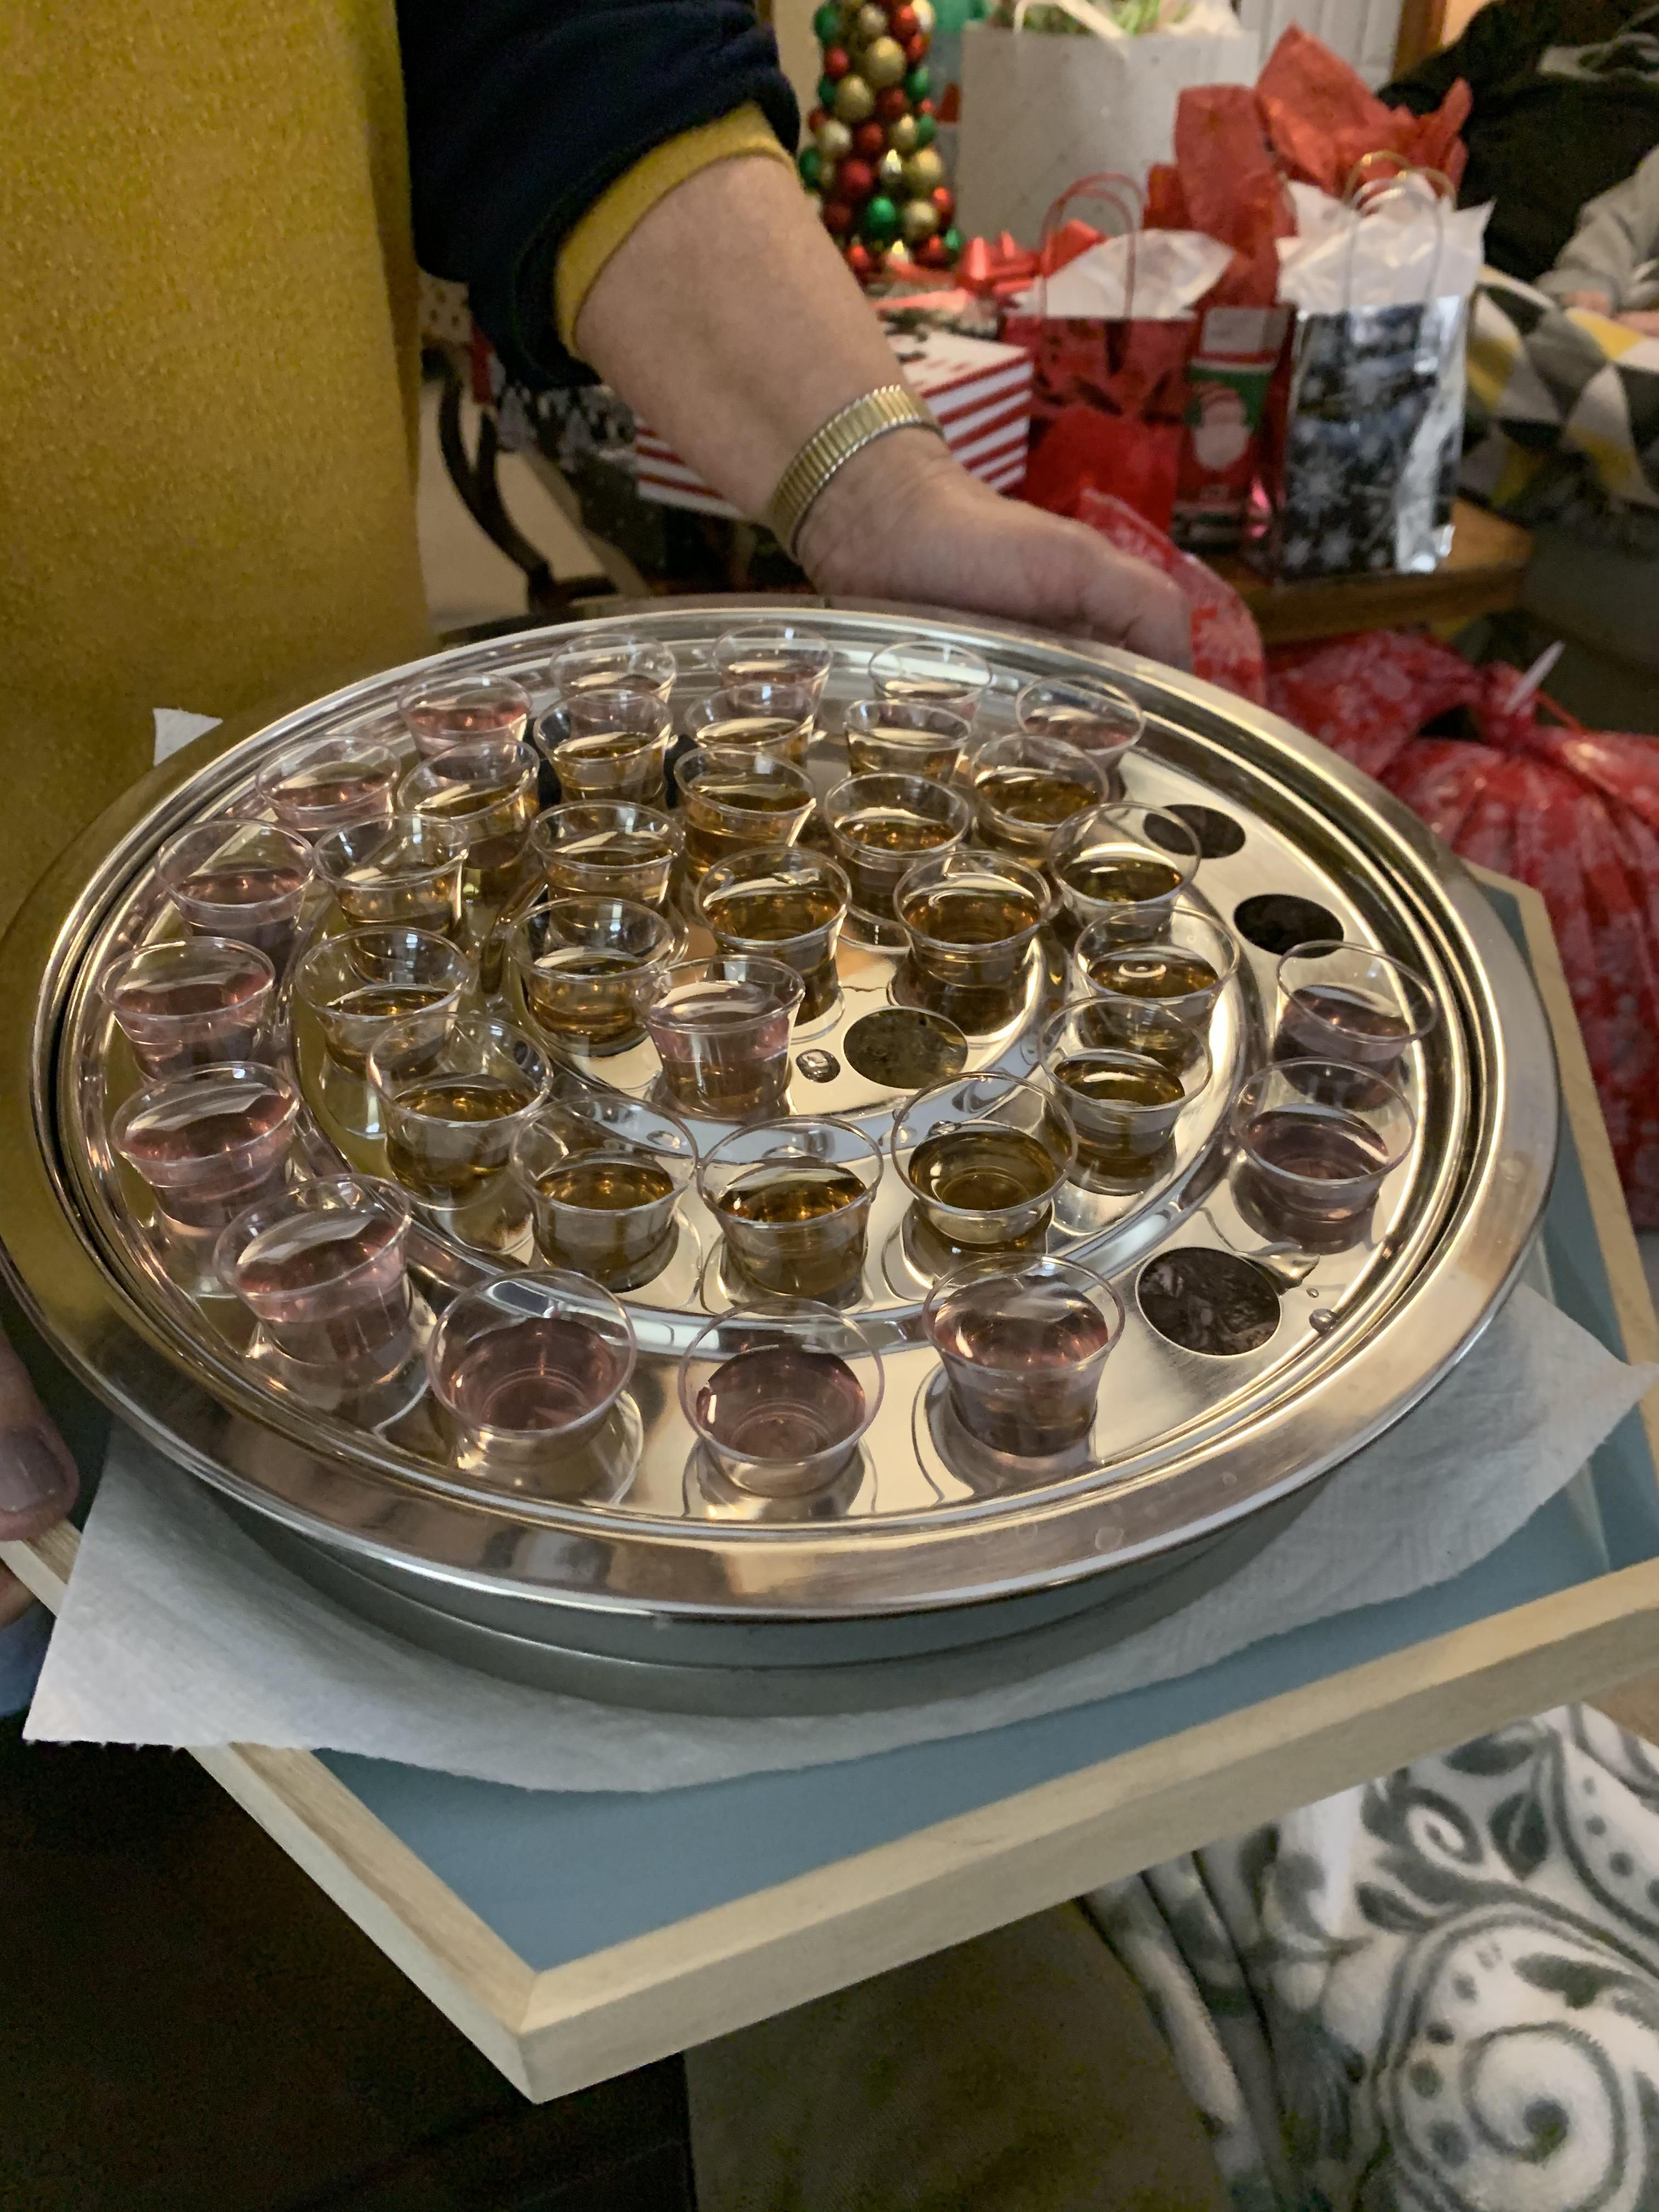 My girlfriends mom passed out shots for thanksgiving on a communion tray.